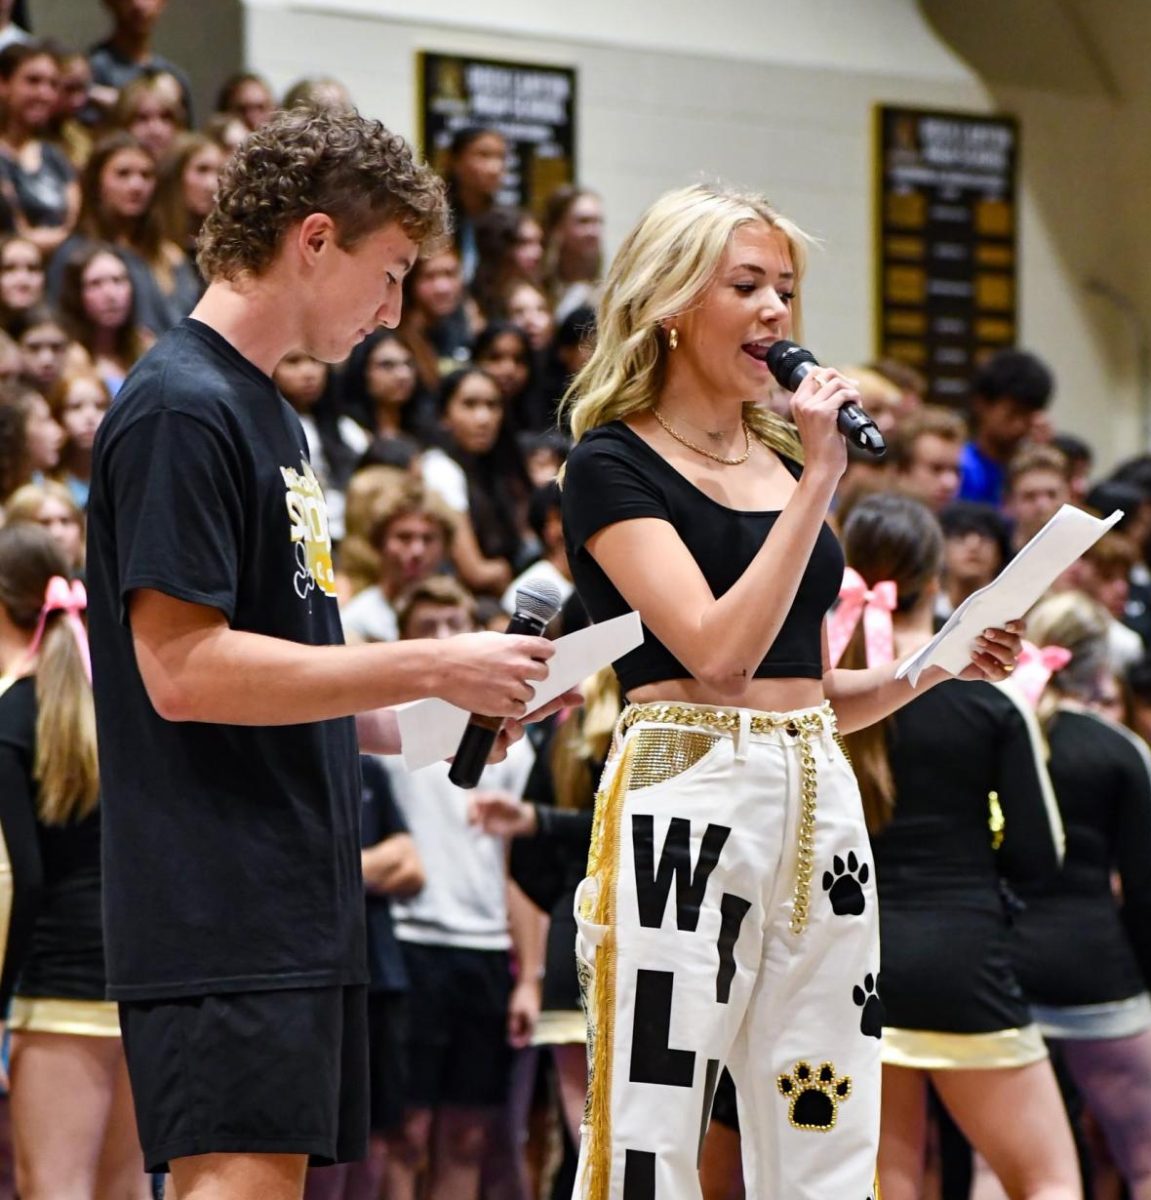 Student Council Student Body President Abigail Williams ‘24 and Student Body Vice President Cale Maguire ‘24 talk about the upcoming year and the Back-to-School Dance Aug. 18. The dance was held in the gym Aug. 18 from 8:00 p.m. to 11:00 p.m. The theme was Barbie, with students encouraged to dress up in pink or dress as Barbie and Ken characters. Through these past four years of high school, one thing I always take away from school assemblies is the feeling you have after walking out of the gym. Every assembly we try to make better than the previous one, Williams said. Whether that be adding more music, incorporating more sports/clubs, or even members from the audience. Just know that at every assembly, the energy is gonna keep getting bigger and better.